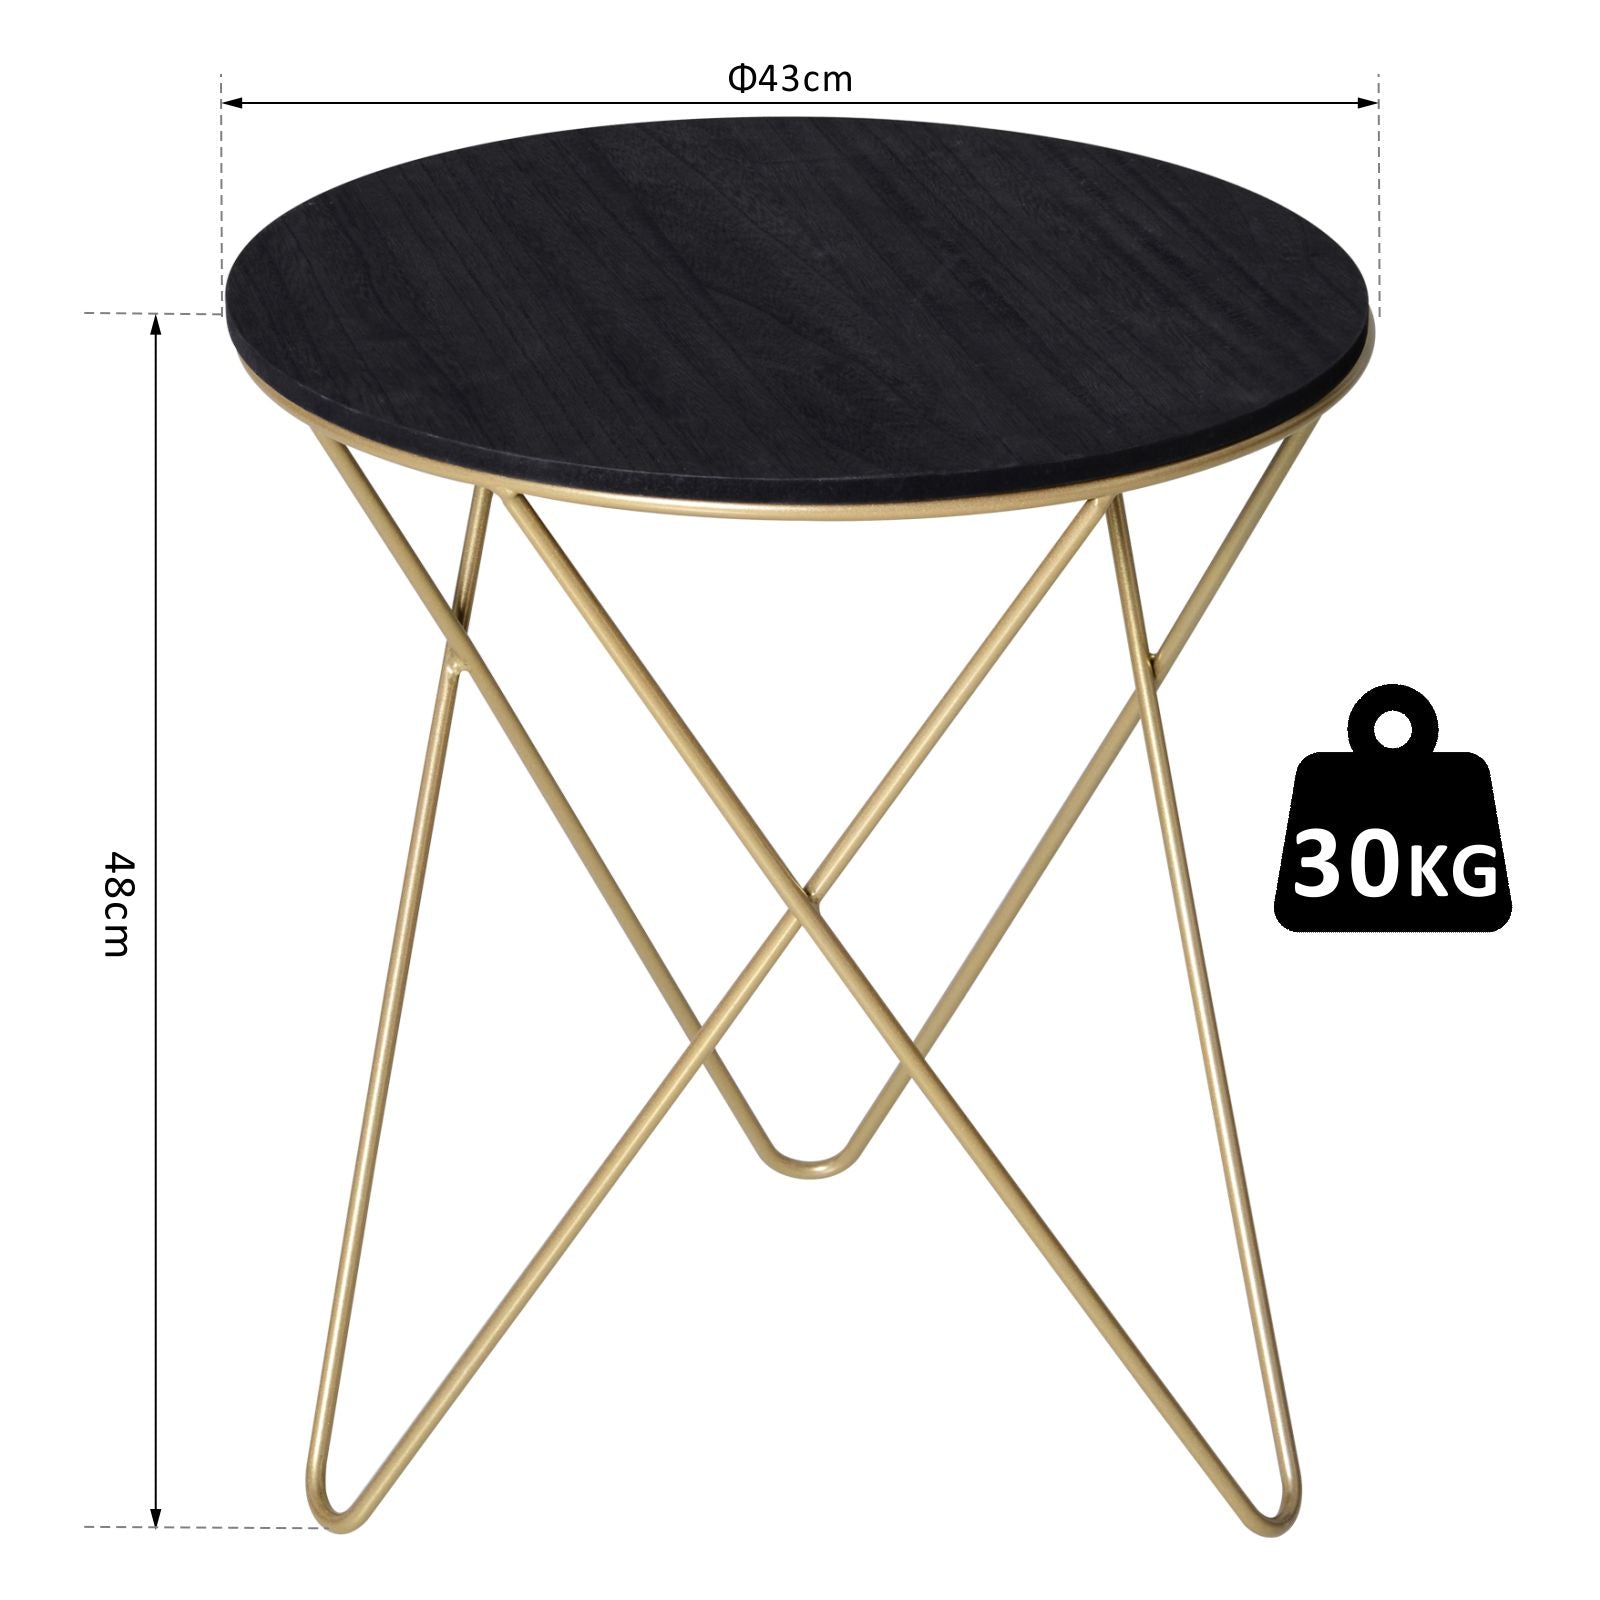 Wooden Metal Round Coffee Table Sofa End Side Bedside Table Modern Style Living Room Decor - Black Gold Color ( ?43cm)-2